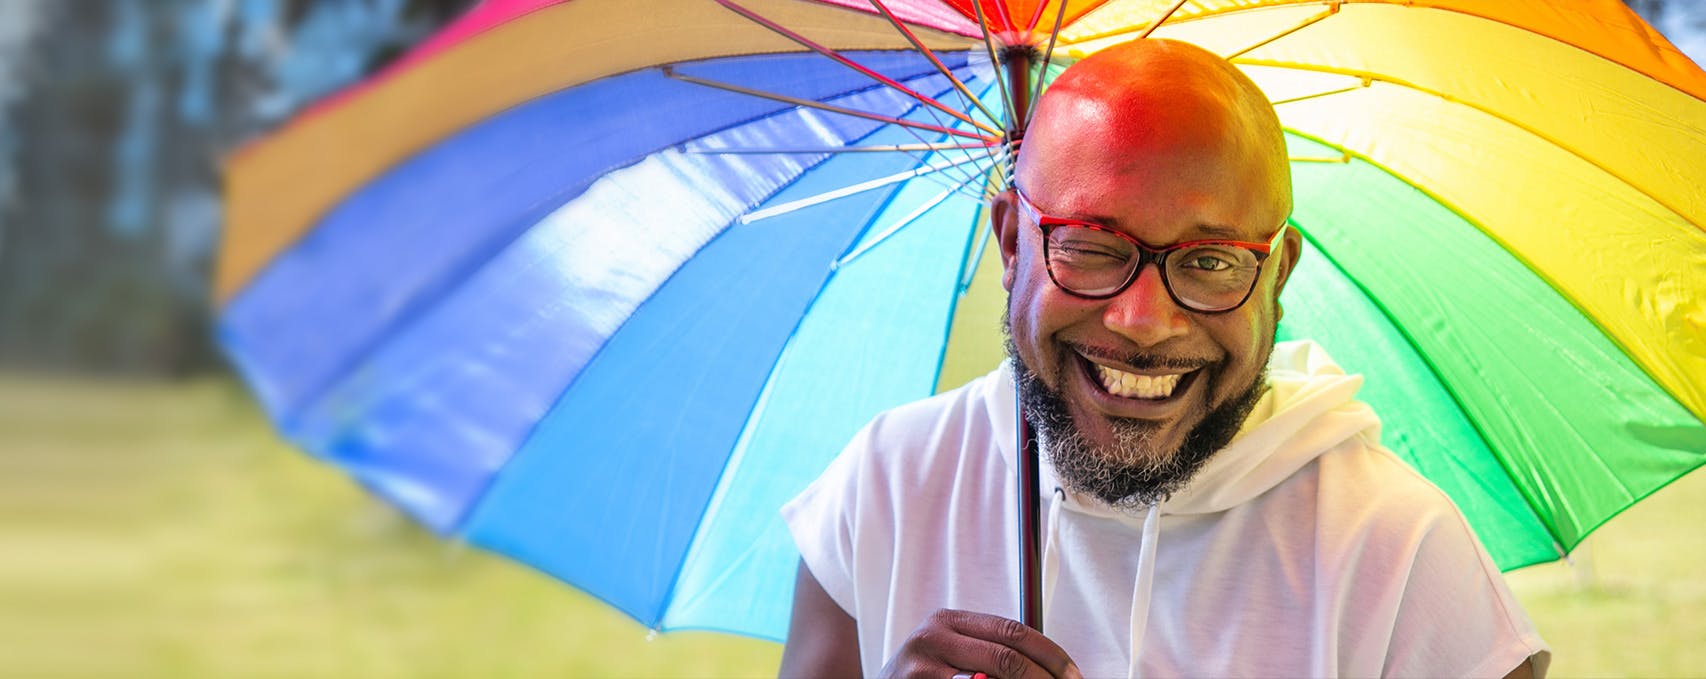 A person smiling with a rainbow umbrella